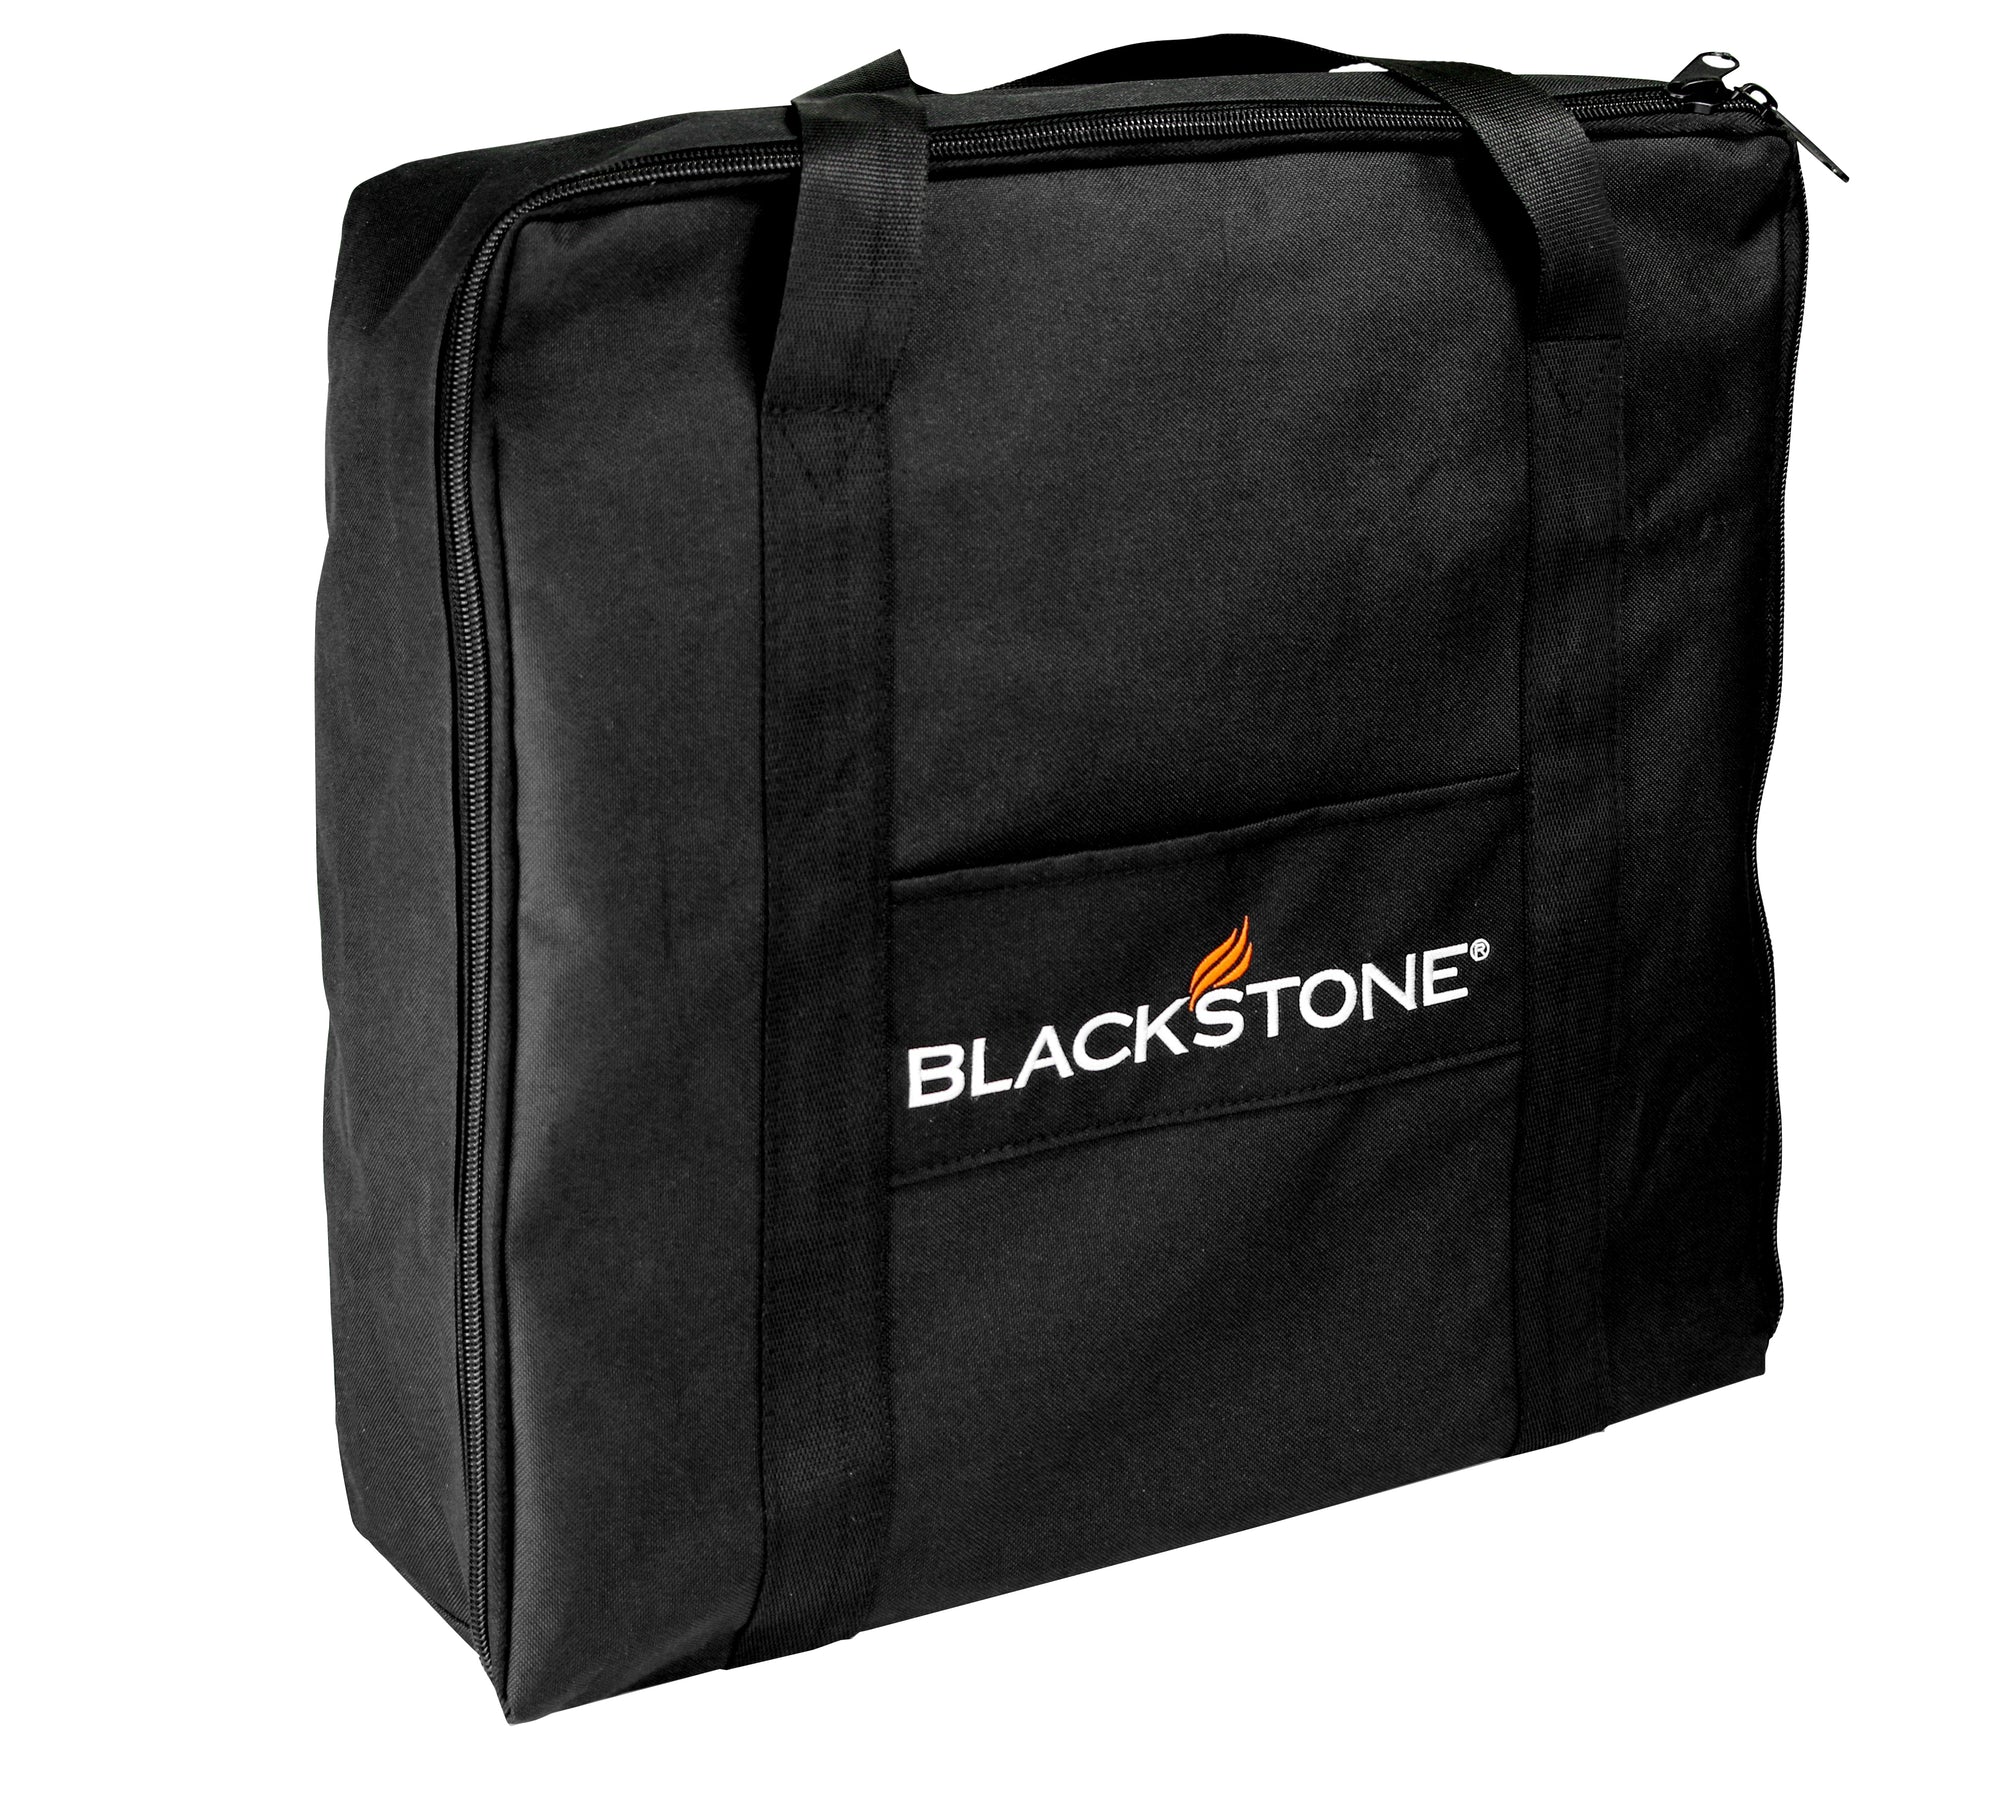 Blackstone 1720 Tabletop Griddle Cover and Carry Bag Set - 17" Without Hood